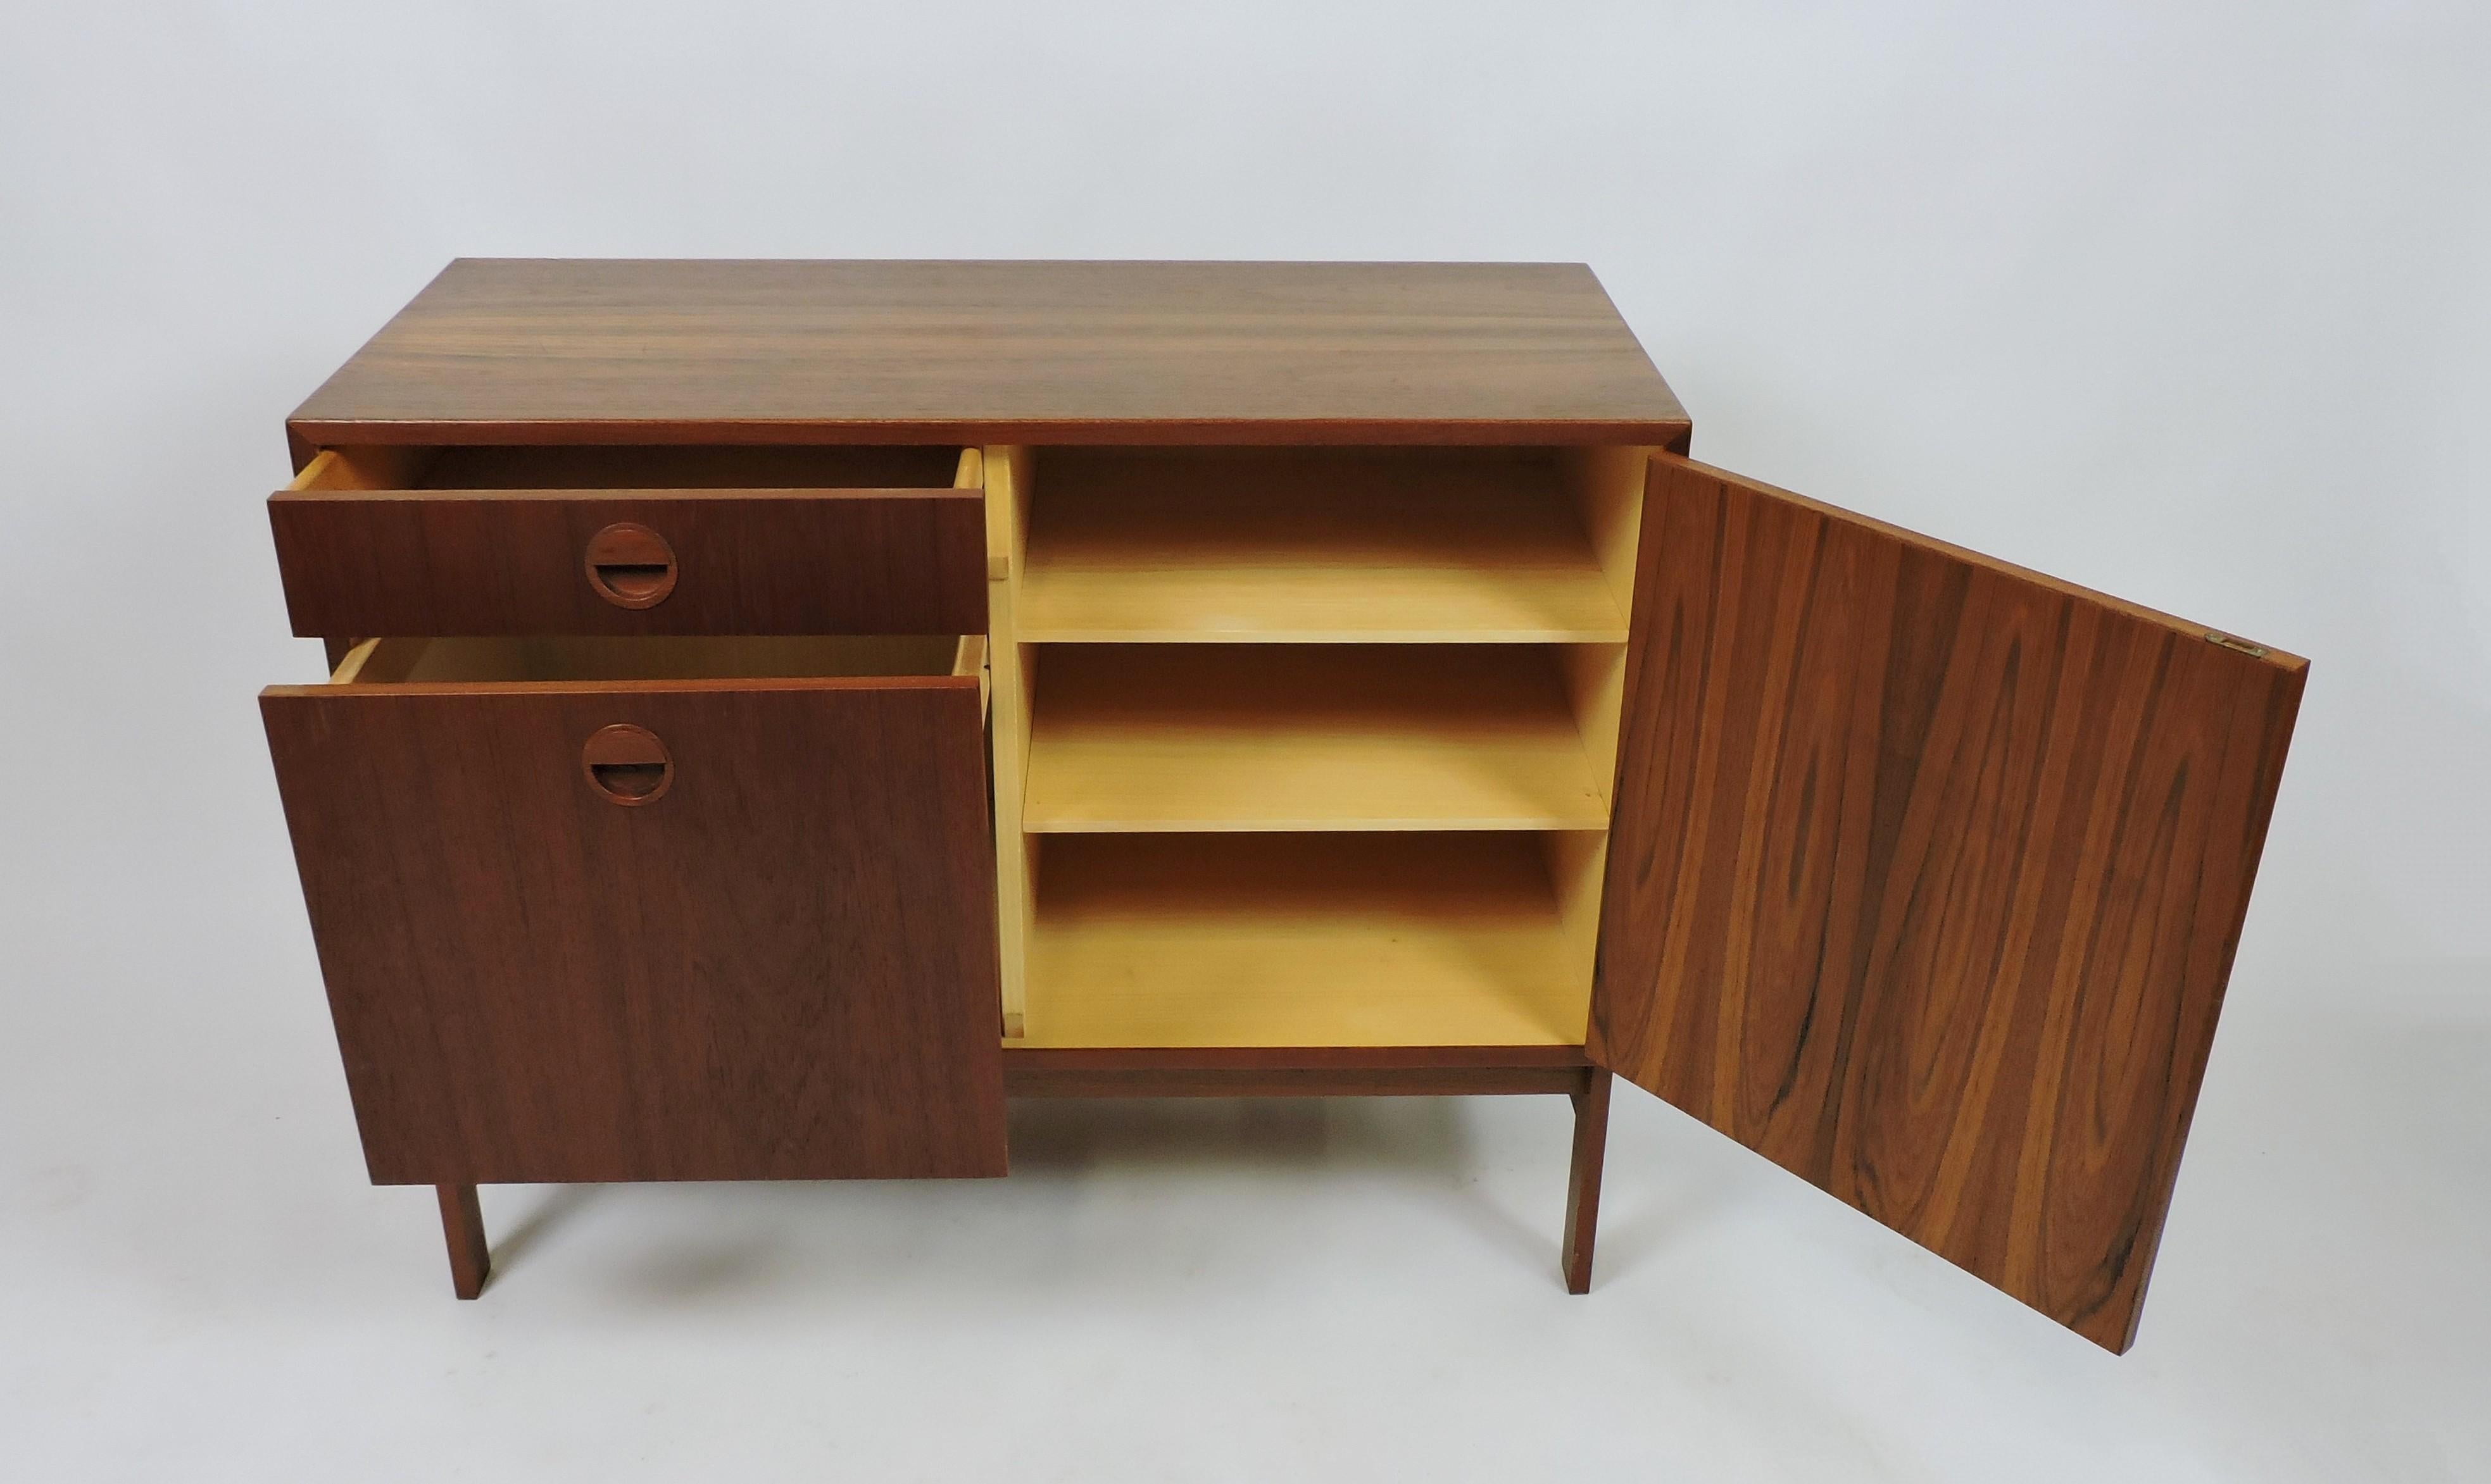 Handsome teak cabinet designed by Rud Thygesen and Johnny Sorensen and made in Denmark by Hansen and Guldborg. This cabinet has one drawer, a compartment with two adjustable shelves, and a filing cabinet, all with the distinctive circular pulls of